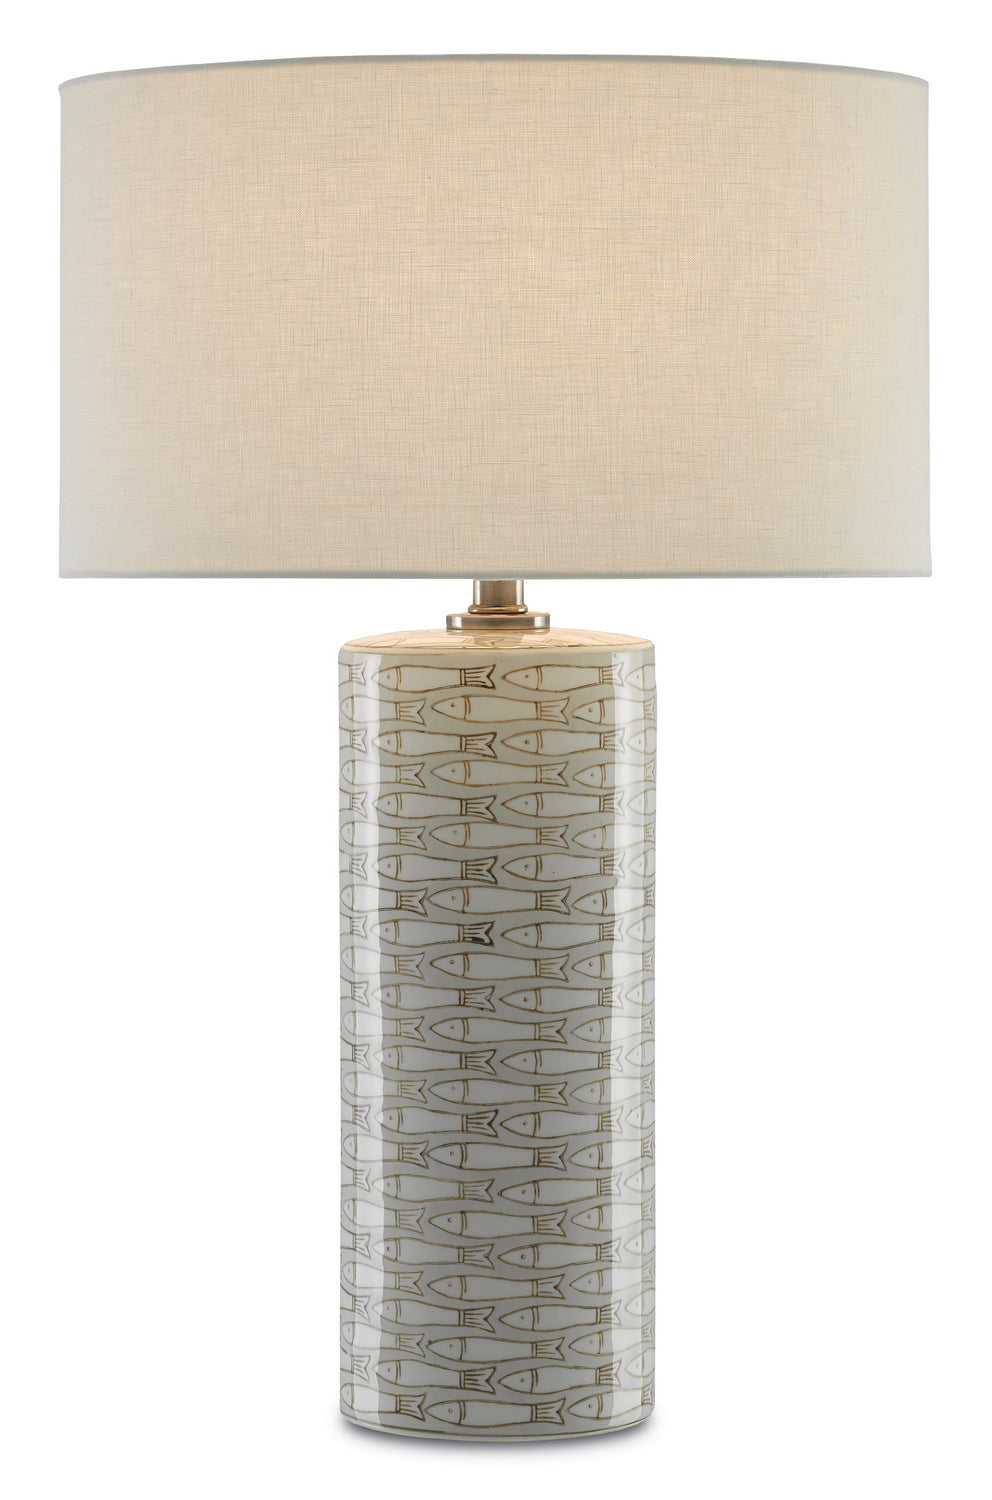 One Light Table Lamp from the Fisch collection in Gray/White/Antique Nickel finish